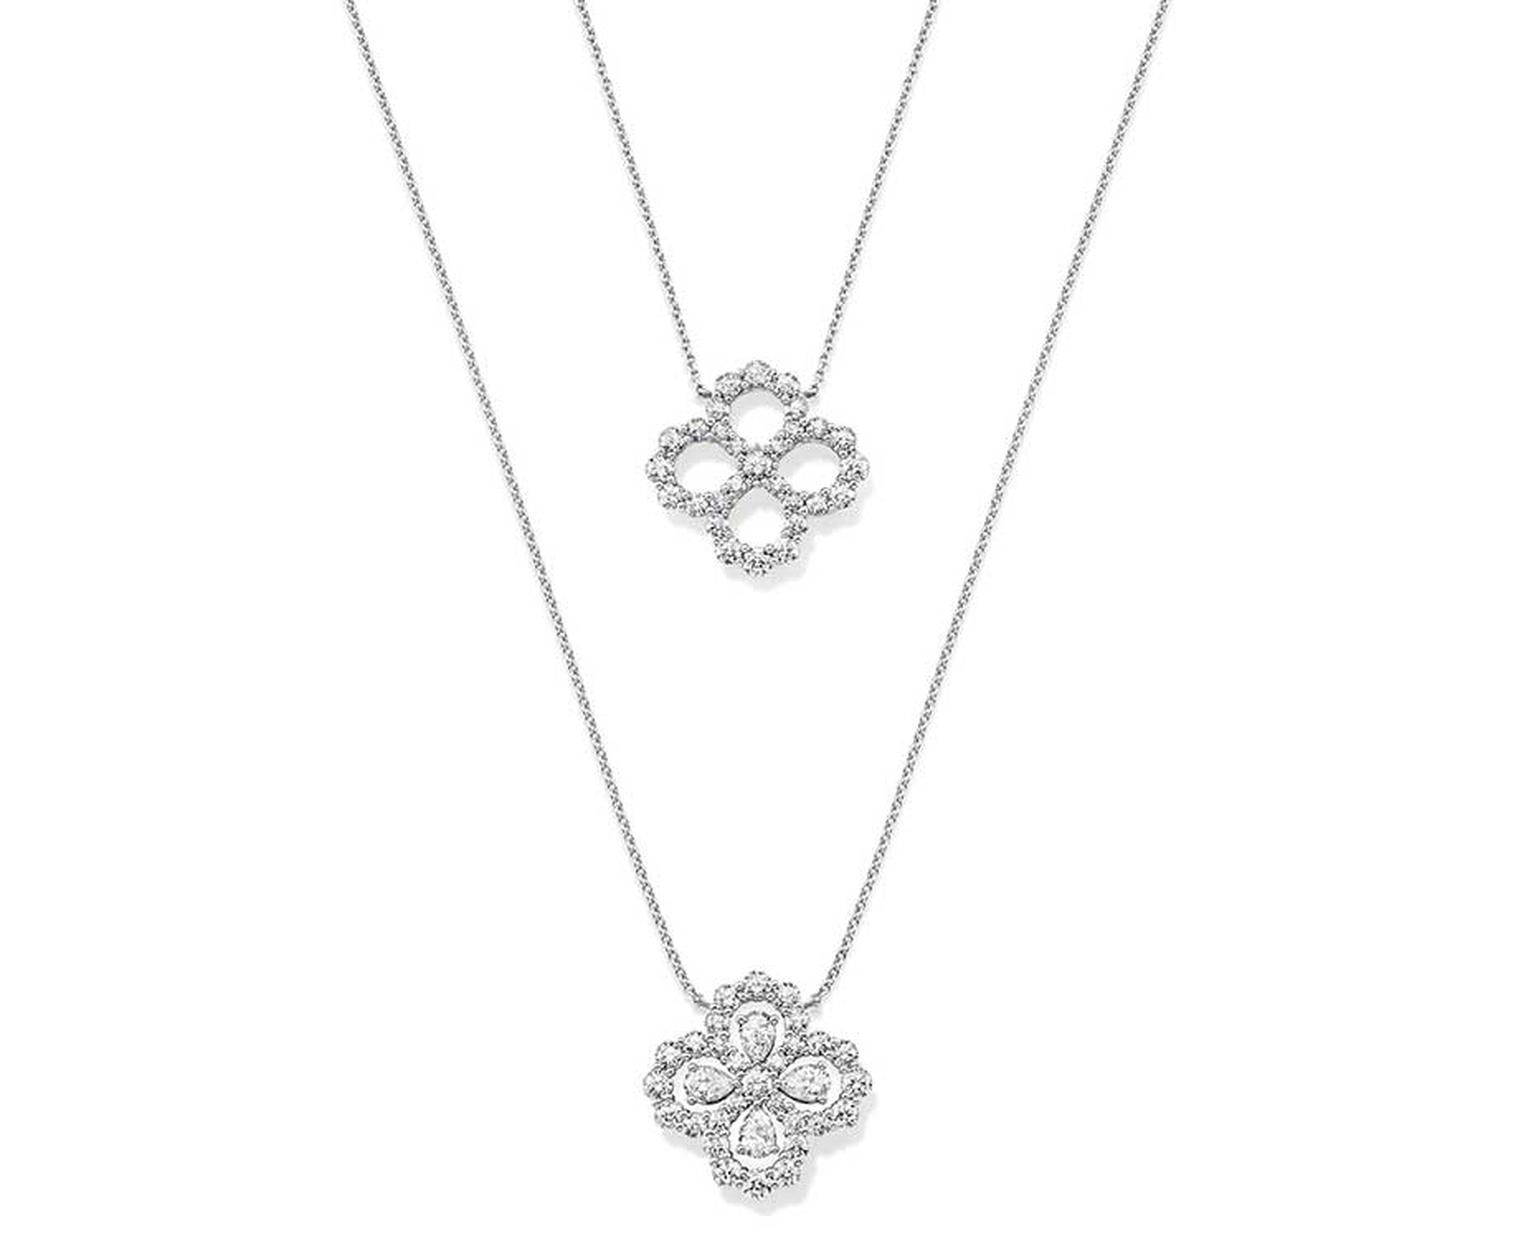 Harry Winston platinum Diamond Loop collection pendants in platinum with or without diamonds within the teardrop motif